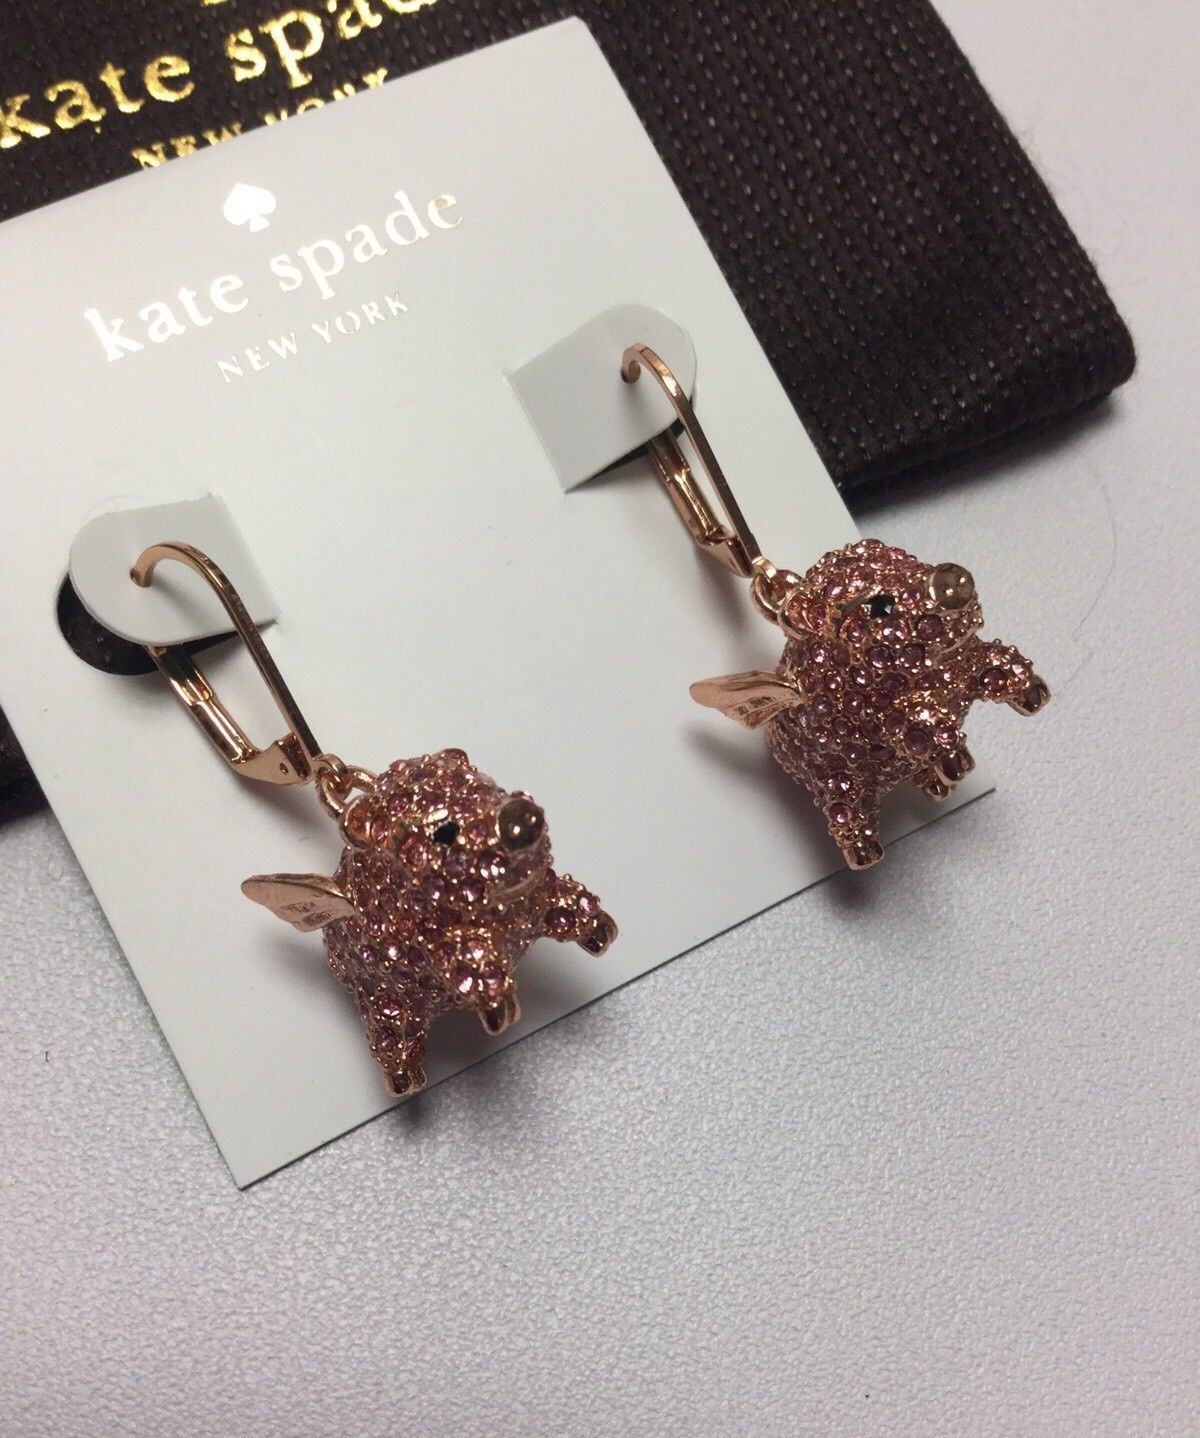 Primary image for Kate Spade Rose Gold imagination pave pig Earrings w/ KS Dust Bag New